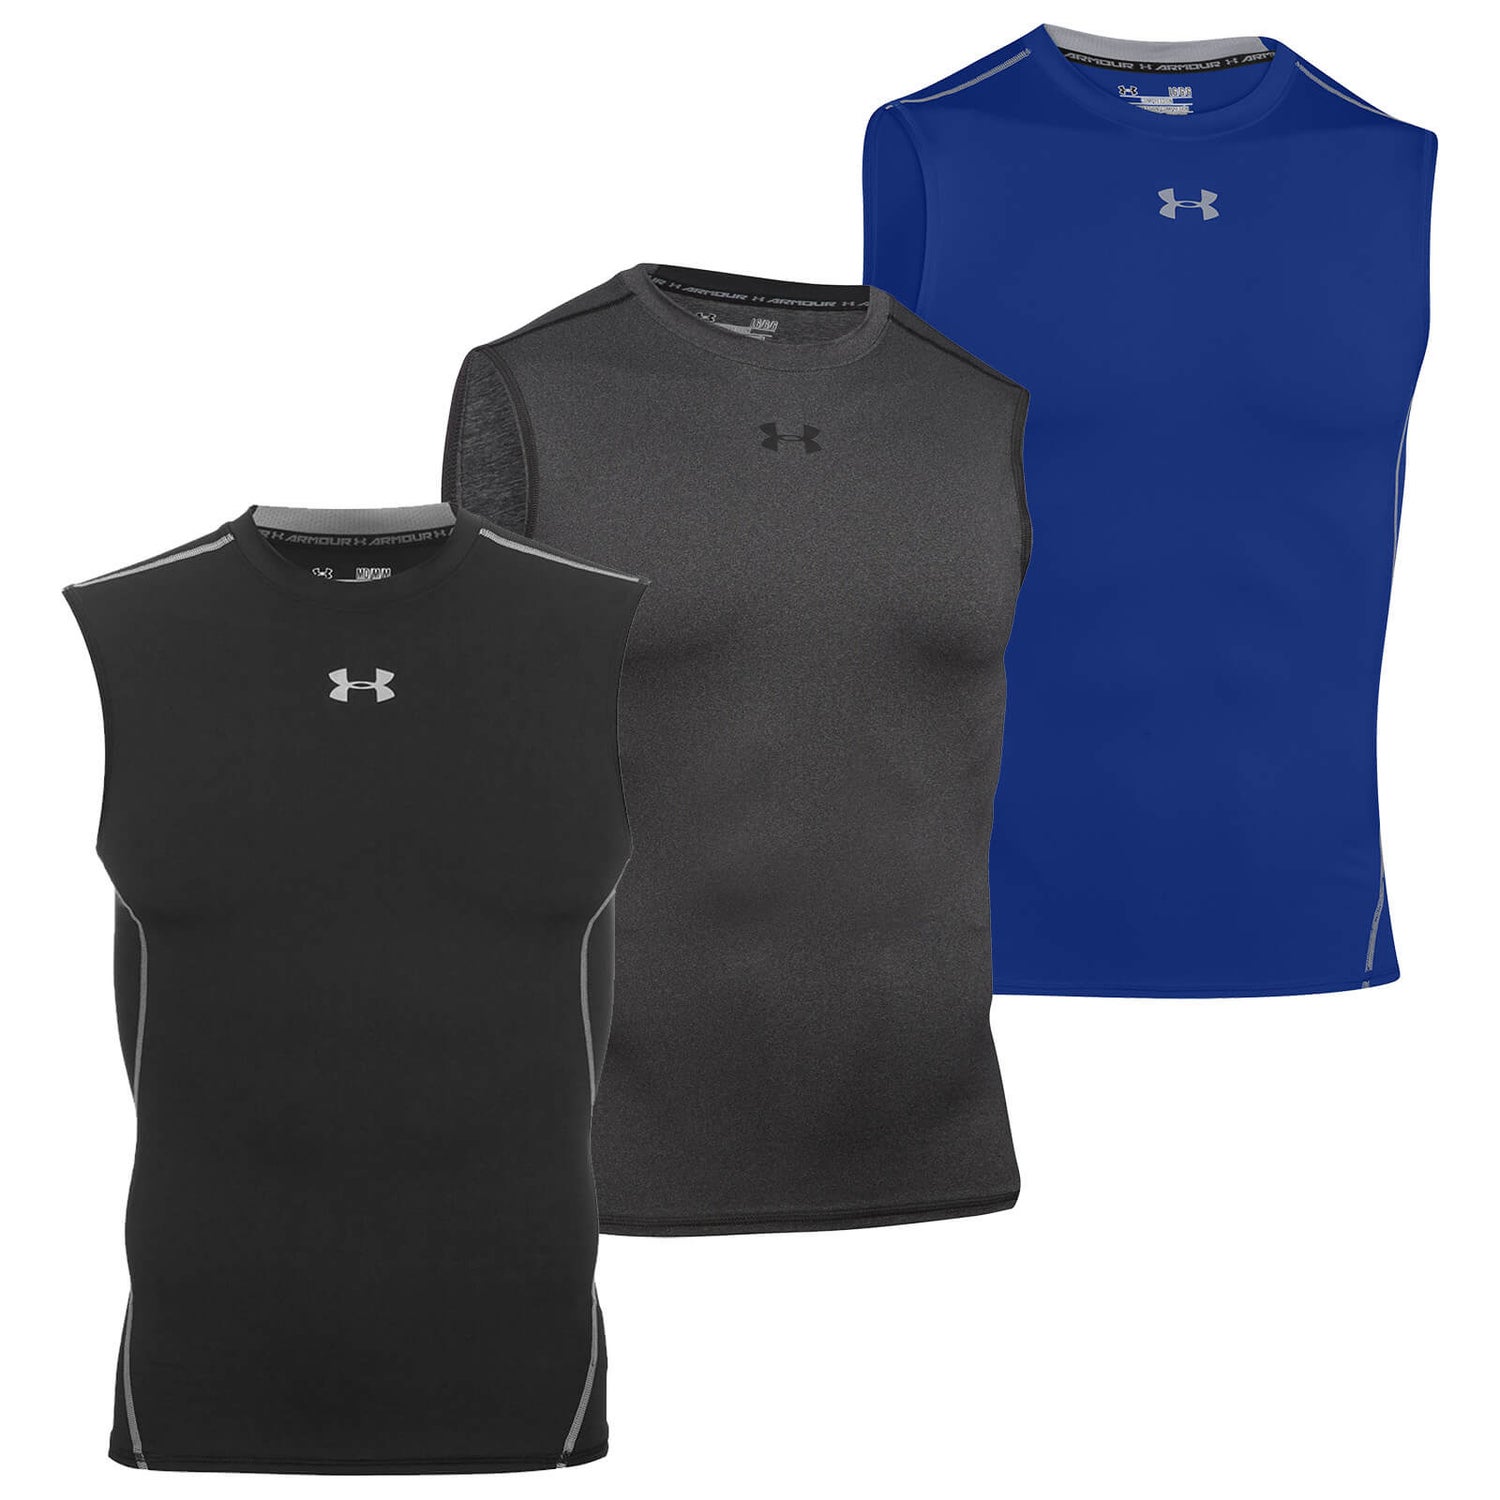 Under Armour Heat Gear Sleeveless Compression Top